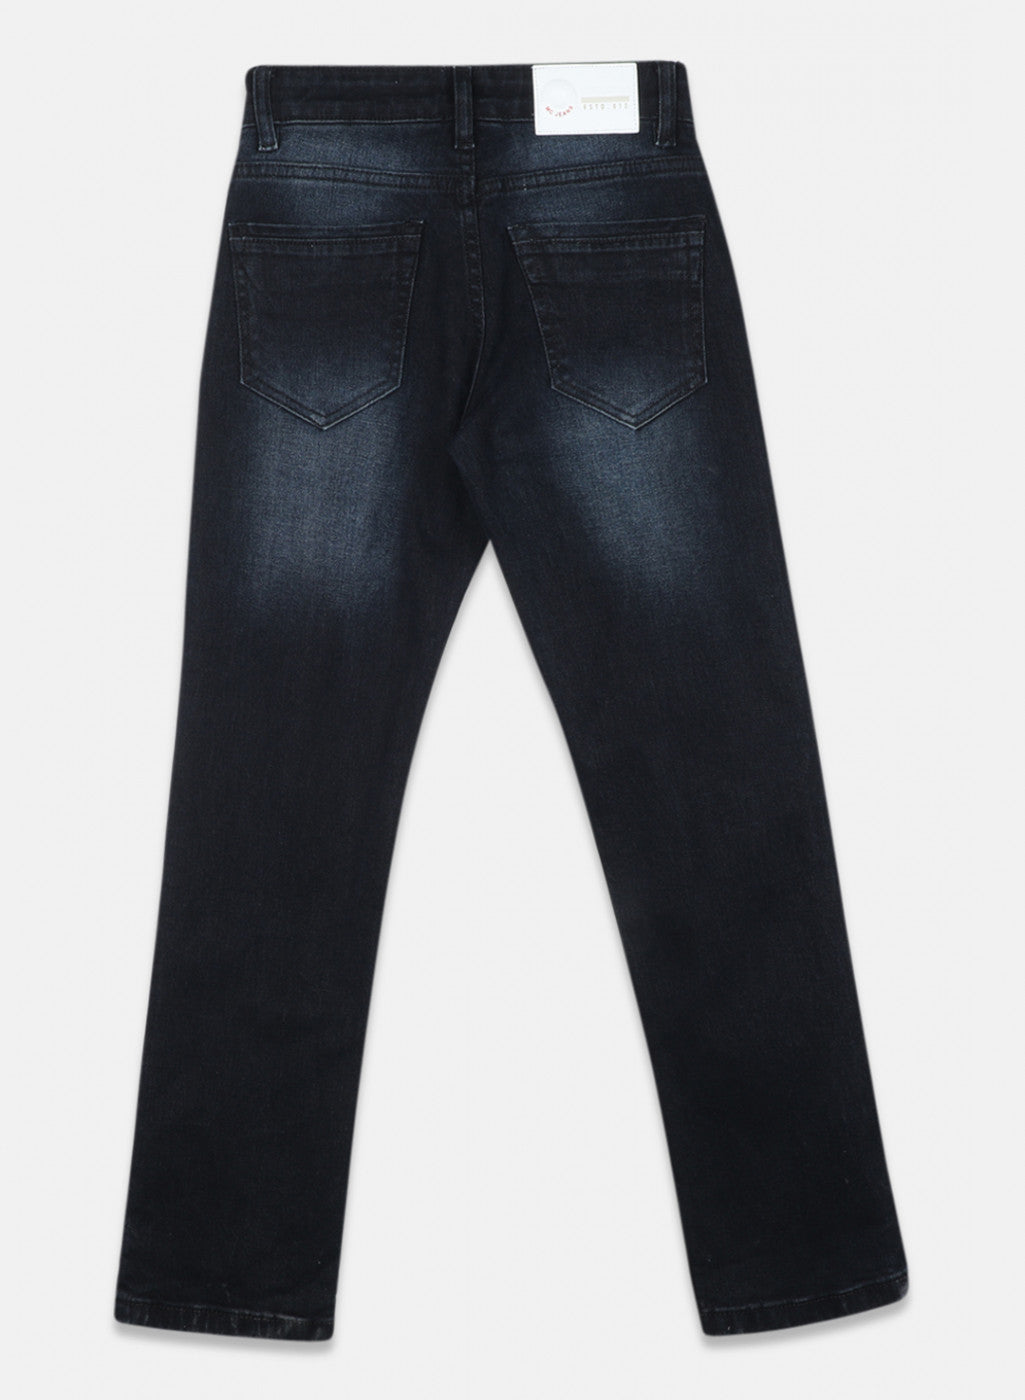 Faded Skin Fit Men Cargo Denim Jeans, Blue at Rs 500/piece in Ludhiana |  ID: 2850560155812